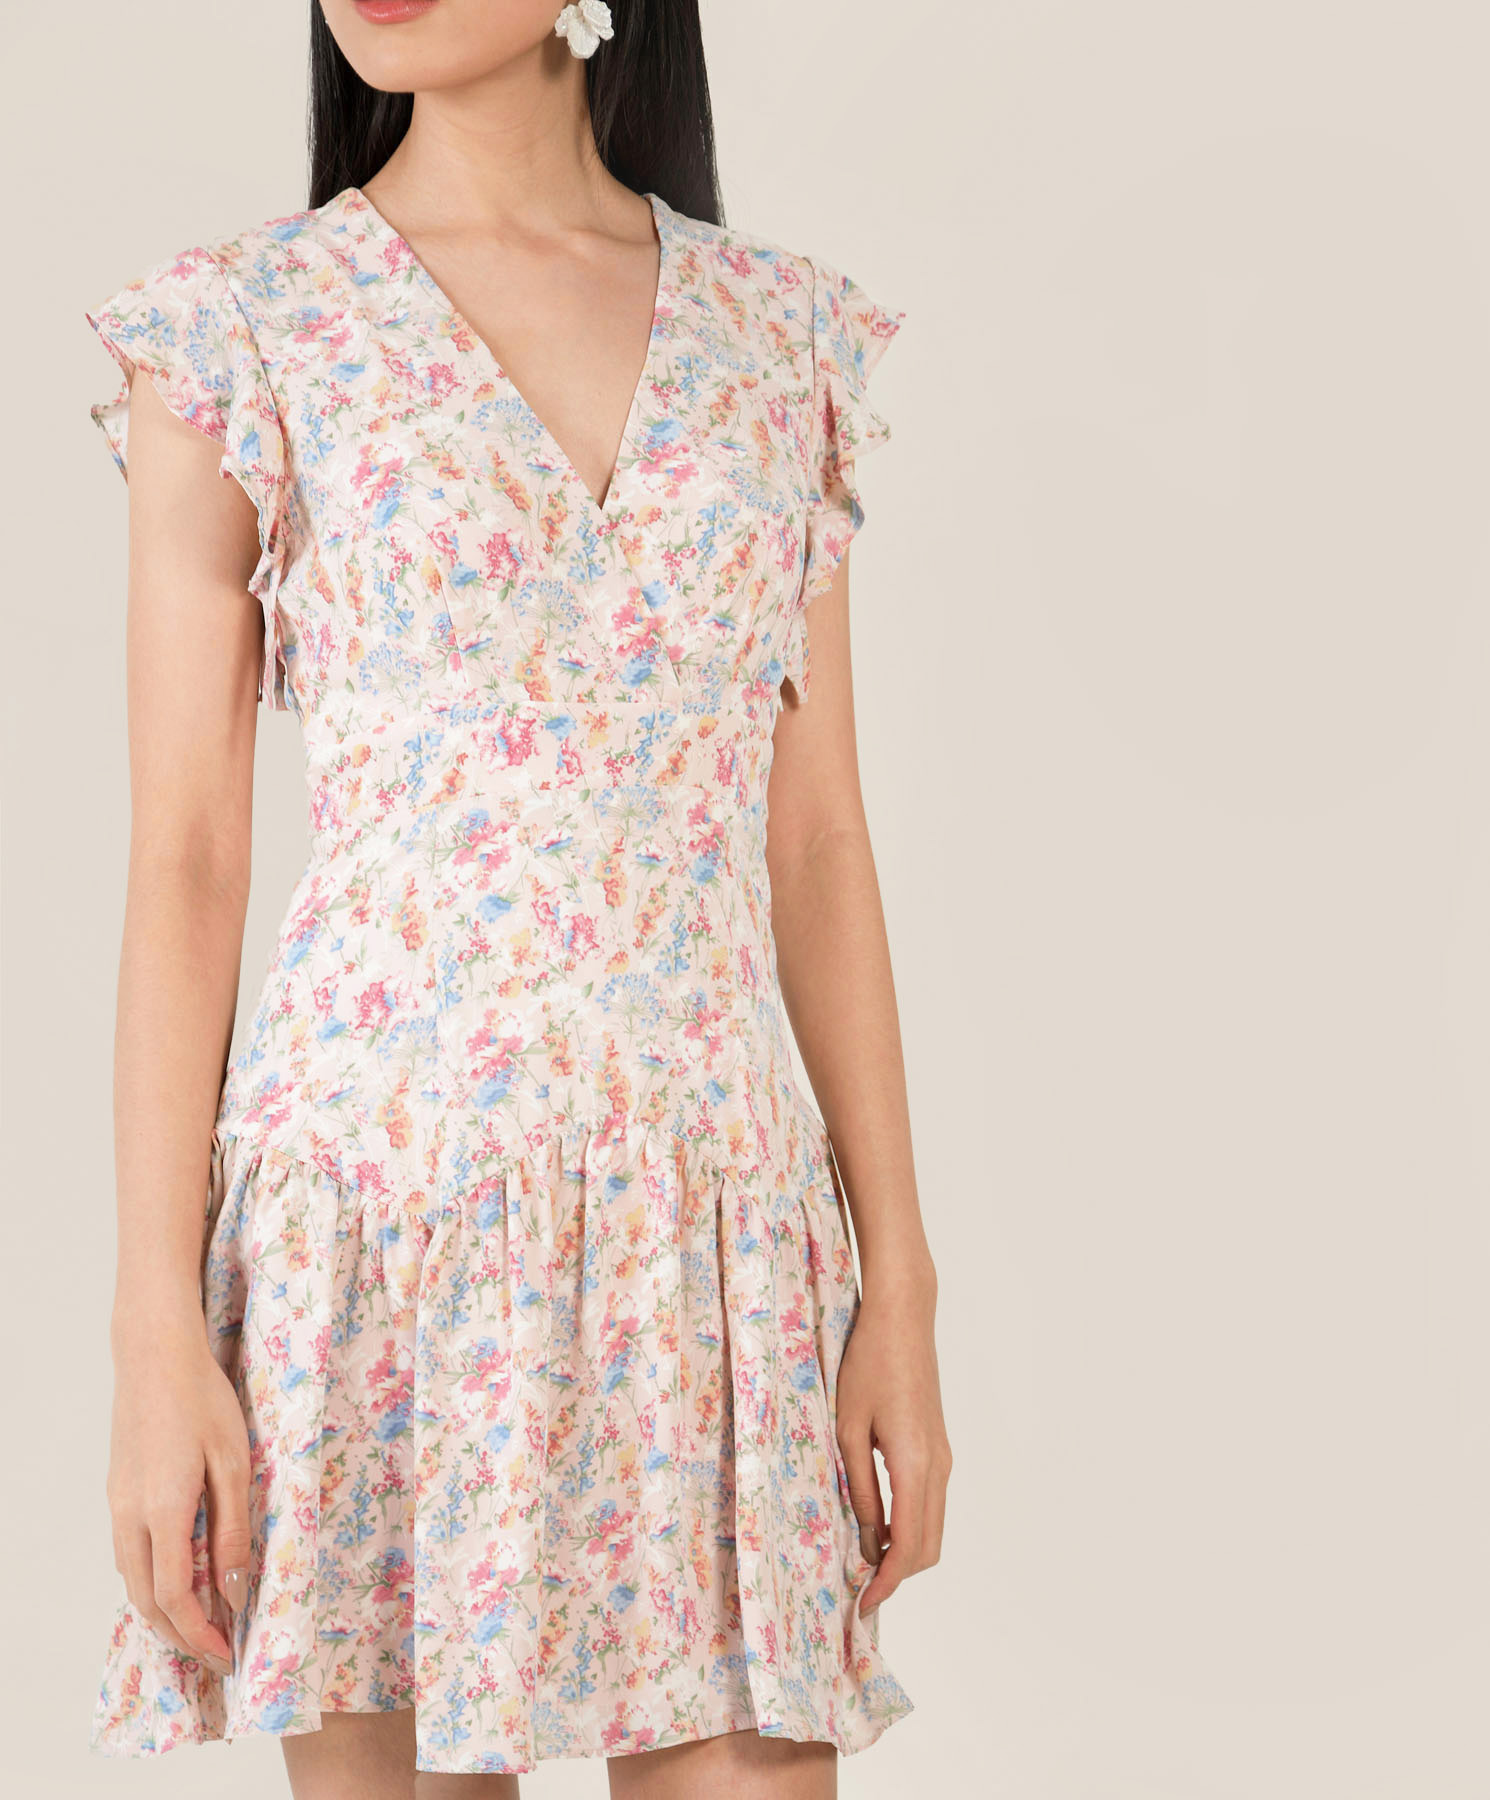 callalily-floral-ruffle-dress-pale-pink-1